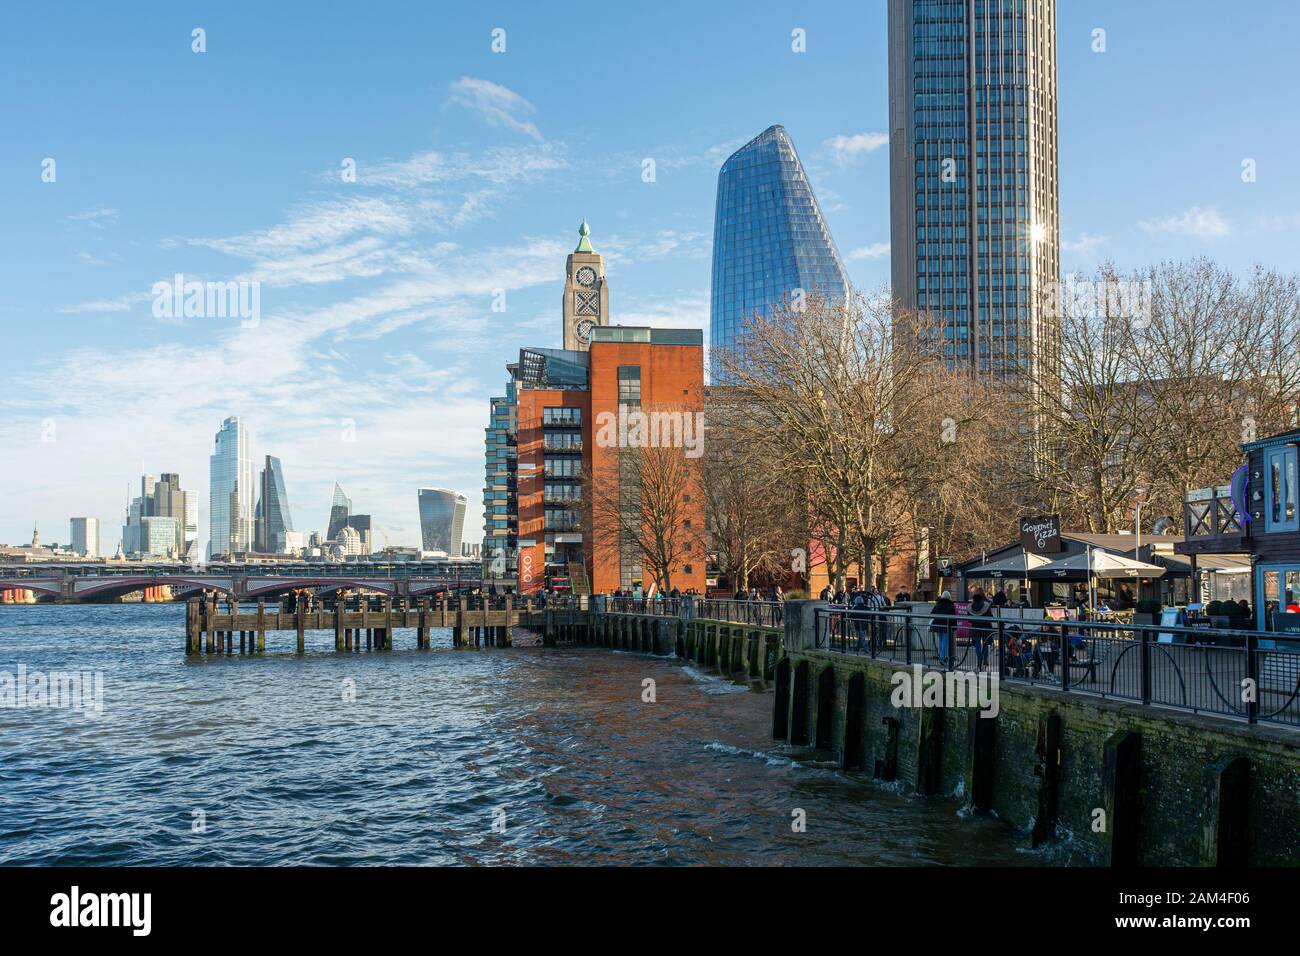 South Bank of the River Thames with the Oxo Tower Wharf, One Blackfriars and the South Bank Tower on a Sunny Winter day, London Foto Stock